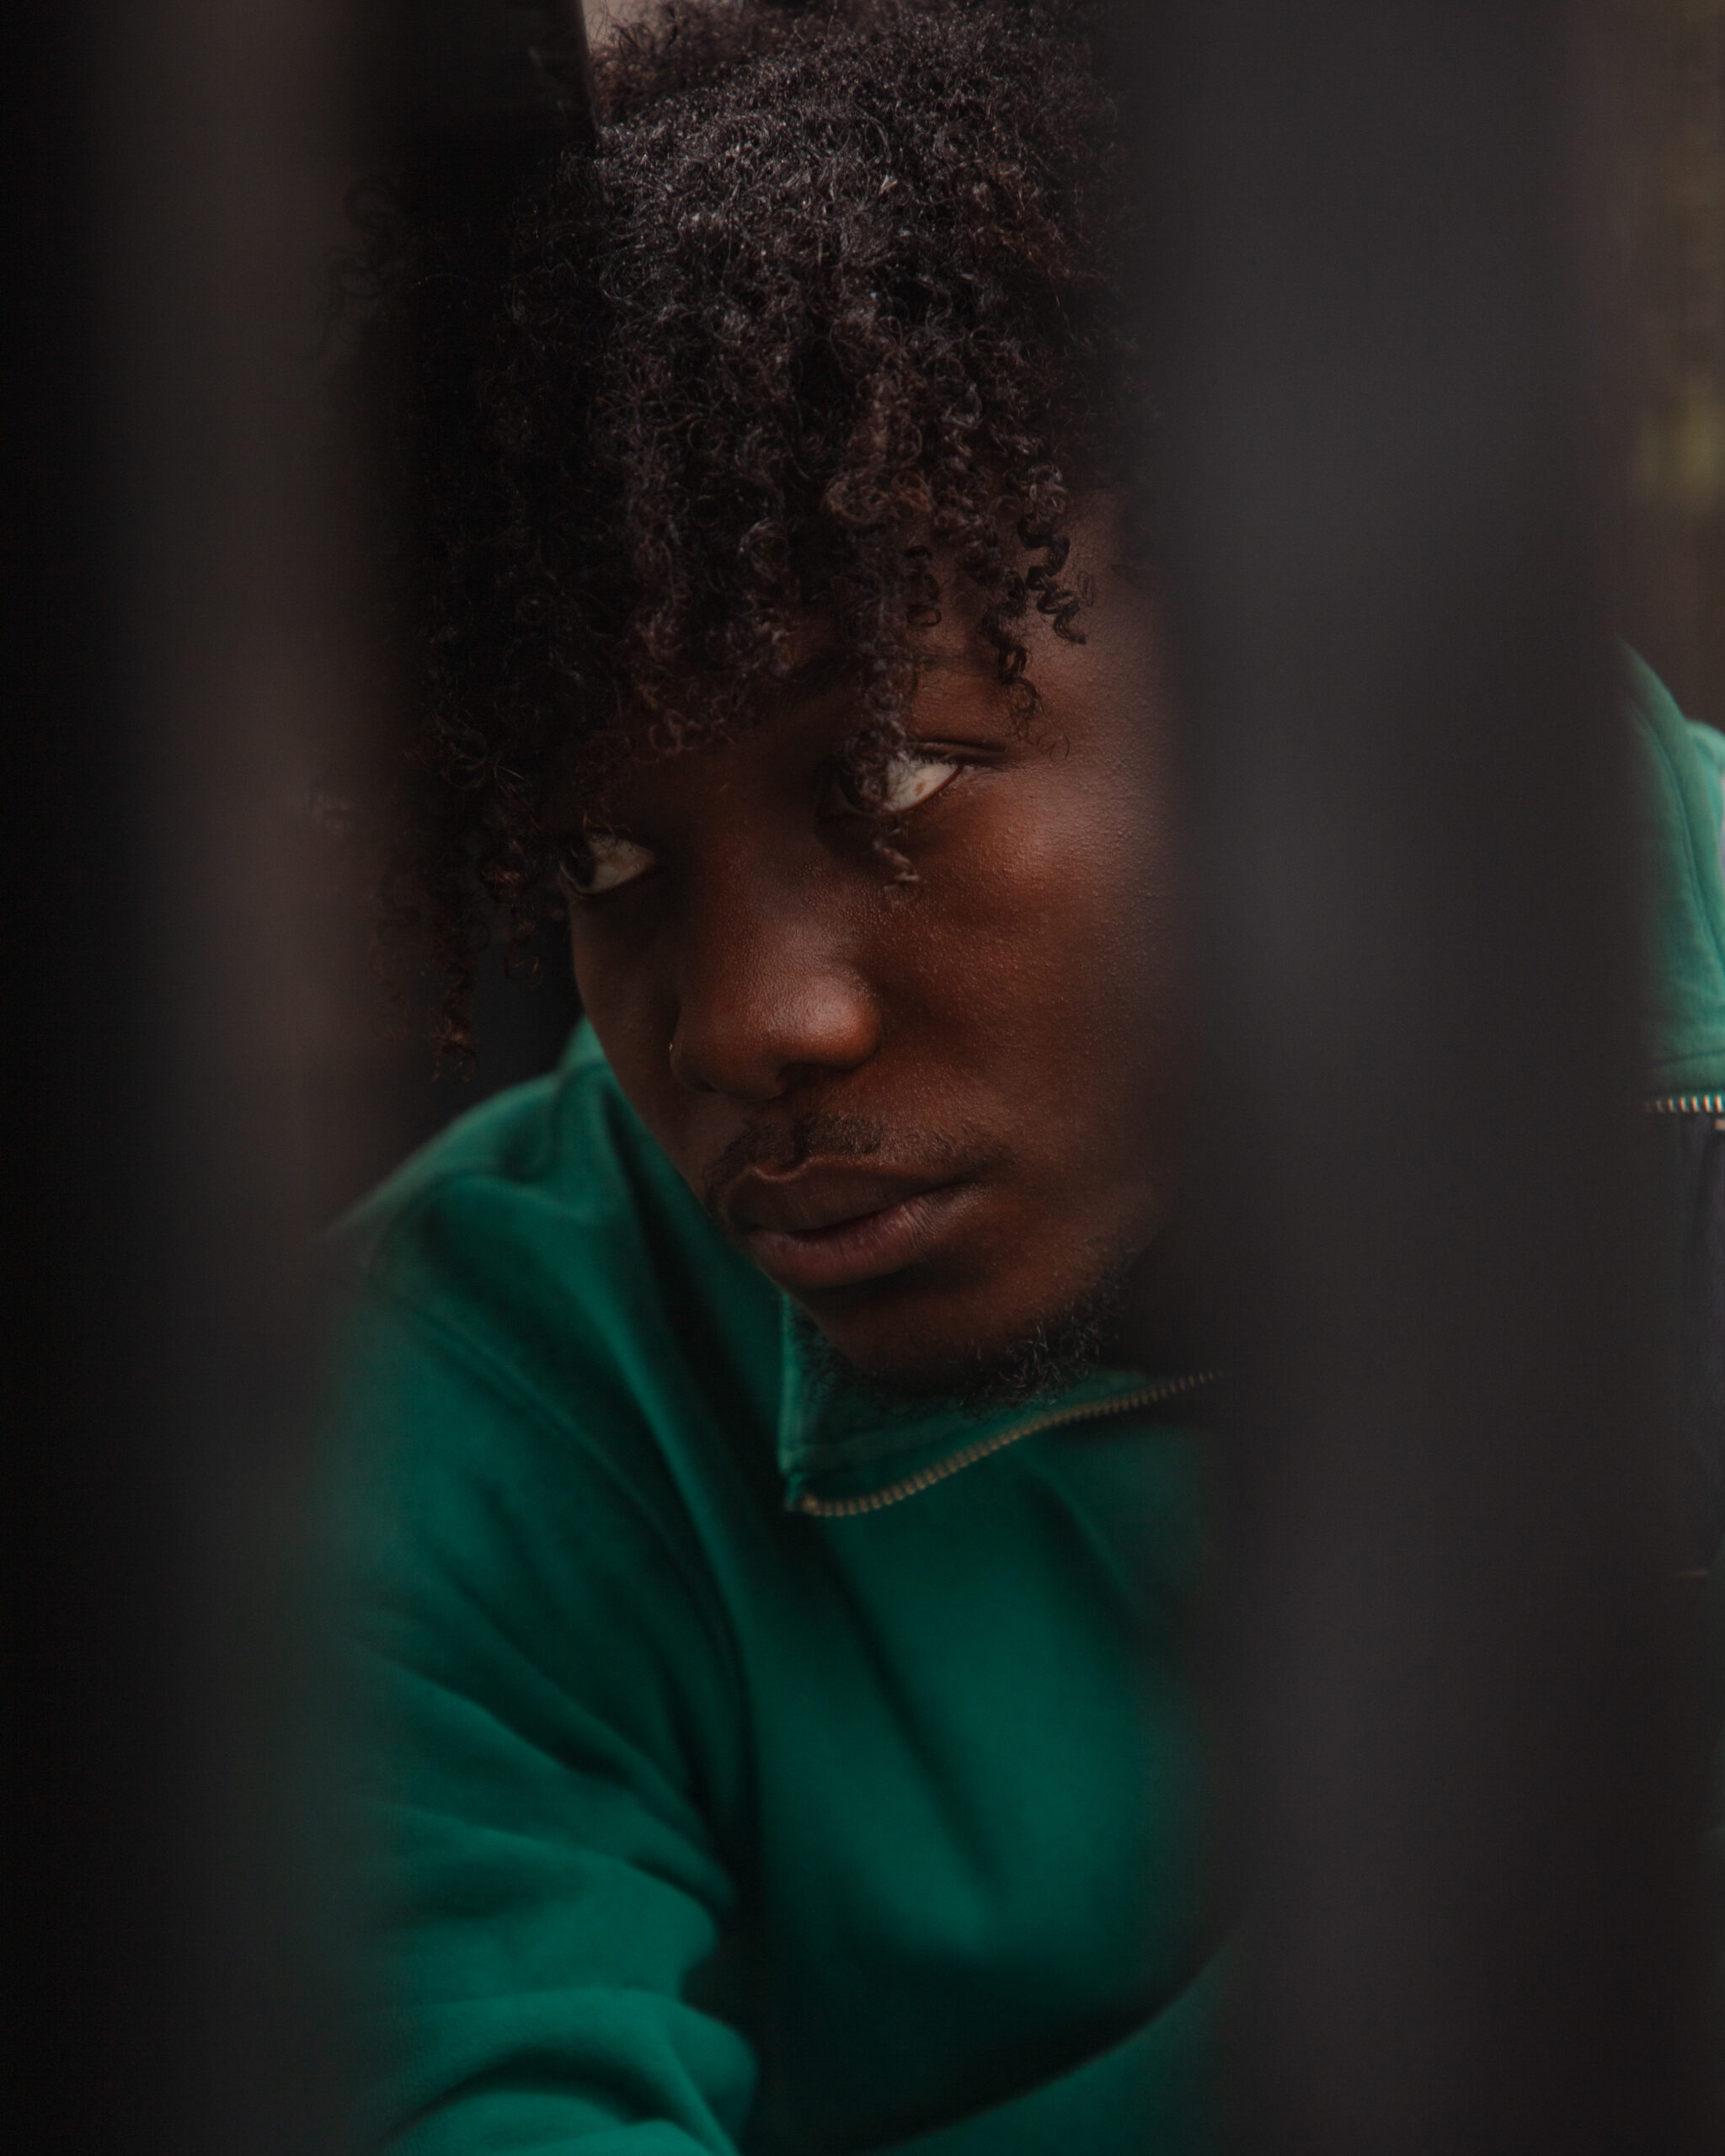 The image is a portrait of a black man with curly hair, wearing a green jacket. The man is looking to the side and not directly at the camera. The photo features a blurred foreground of grey bars, with the focus on the man's face, and a soft, indistinct background